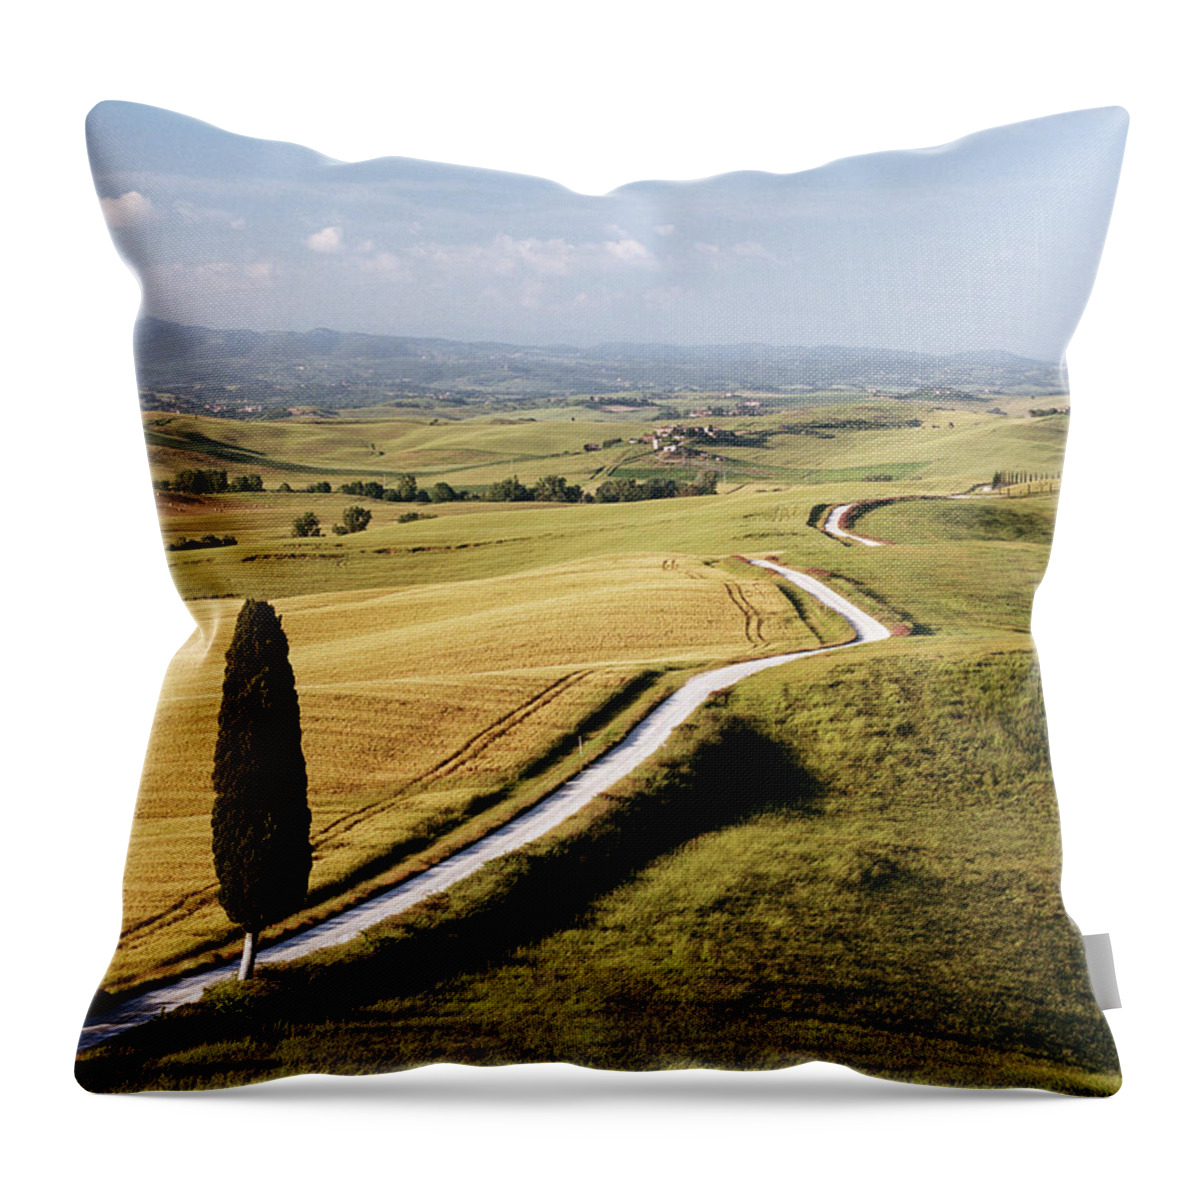 Scenics Throw Pillow featuring the photograph Cypress Tree By Road In Tuscany by Gary Yeowell